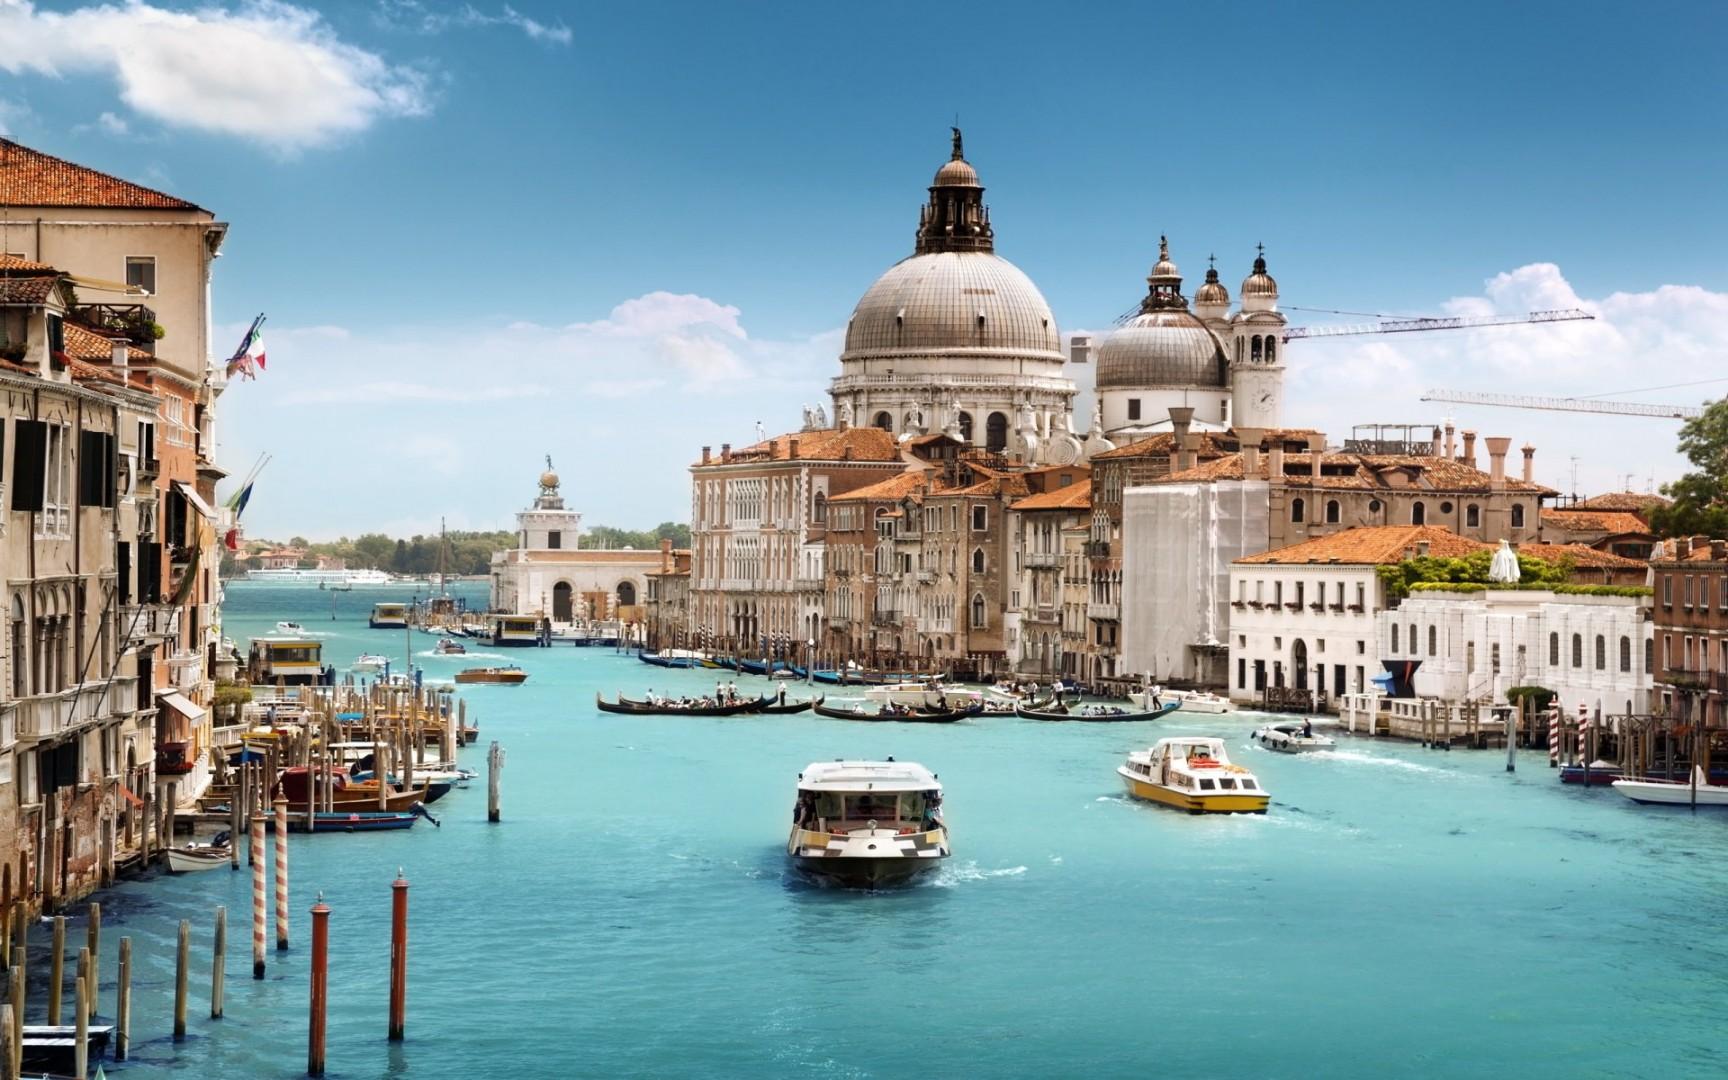 The Grand Canal Of Venice Italy hd wallpapers